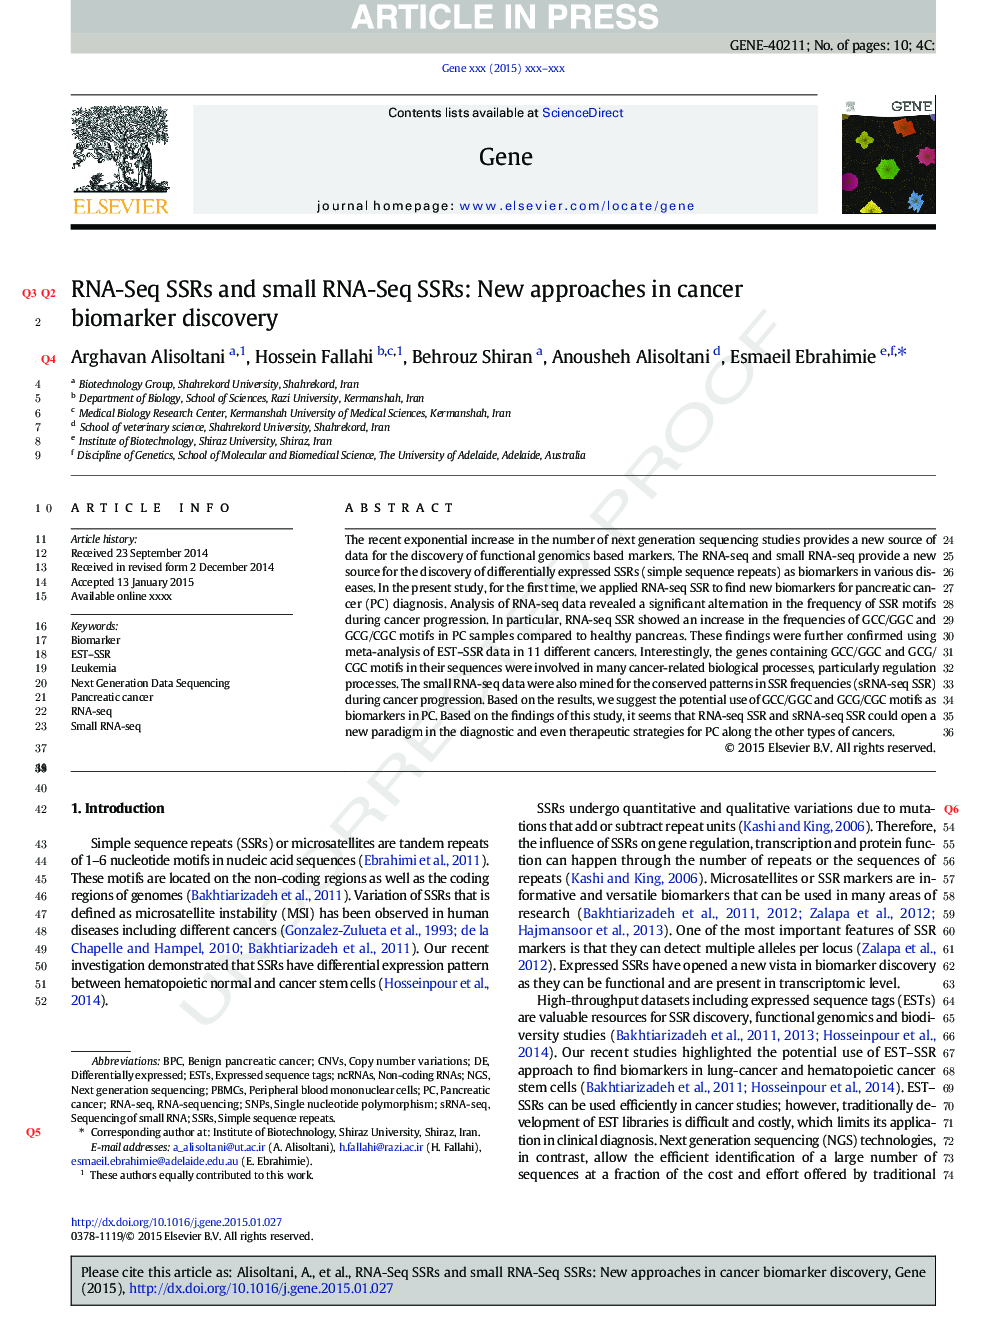 RNA-Seq SSRs and small RNA-Seq SSRs: New approaches in cancer biomarker discovery